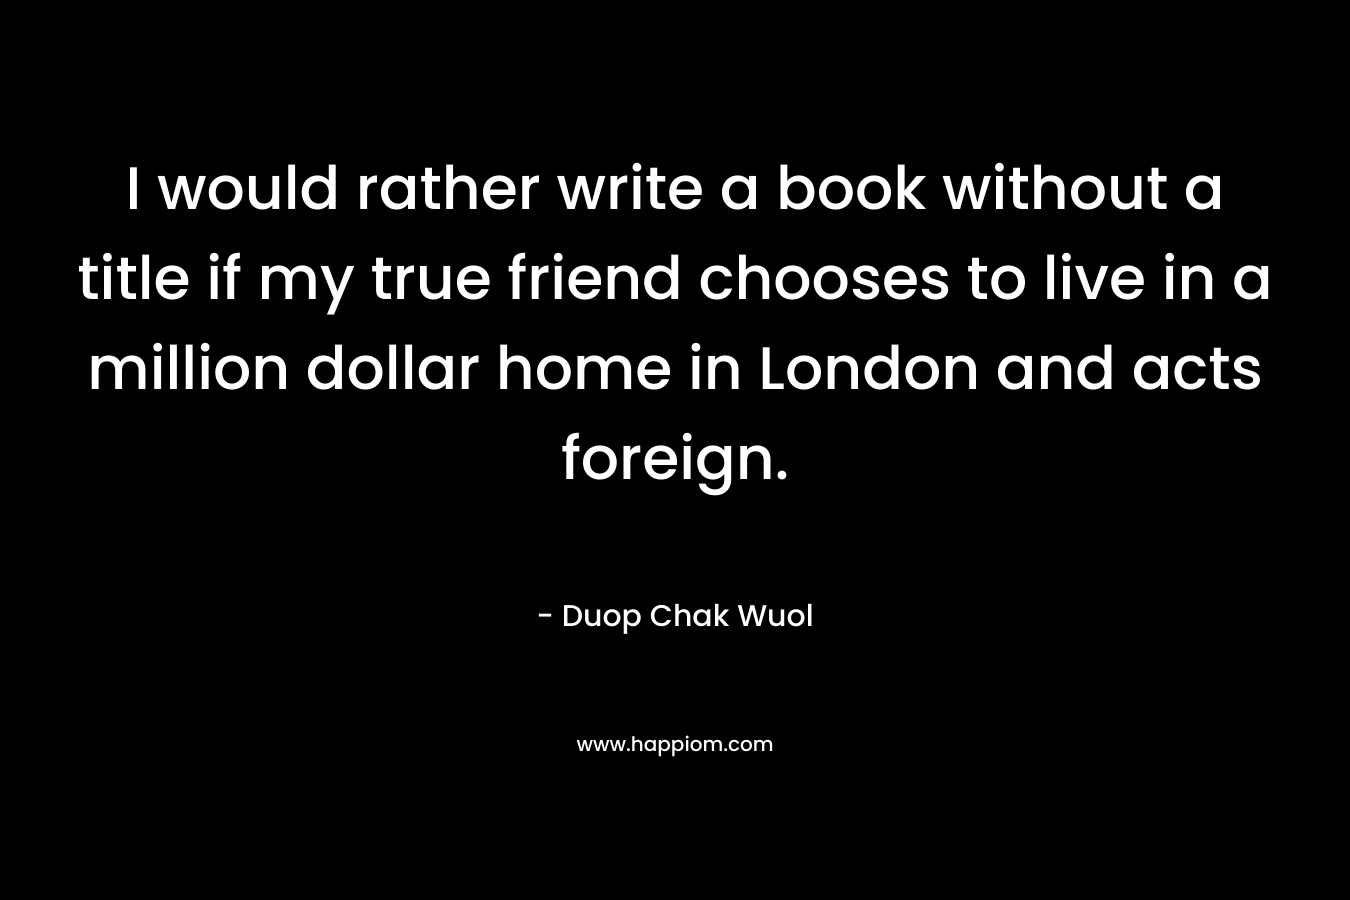 I would rather write a book without a title if my true friend chooses to live in a million dollar home in London and acts foreign.